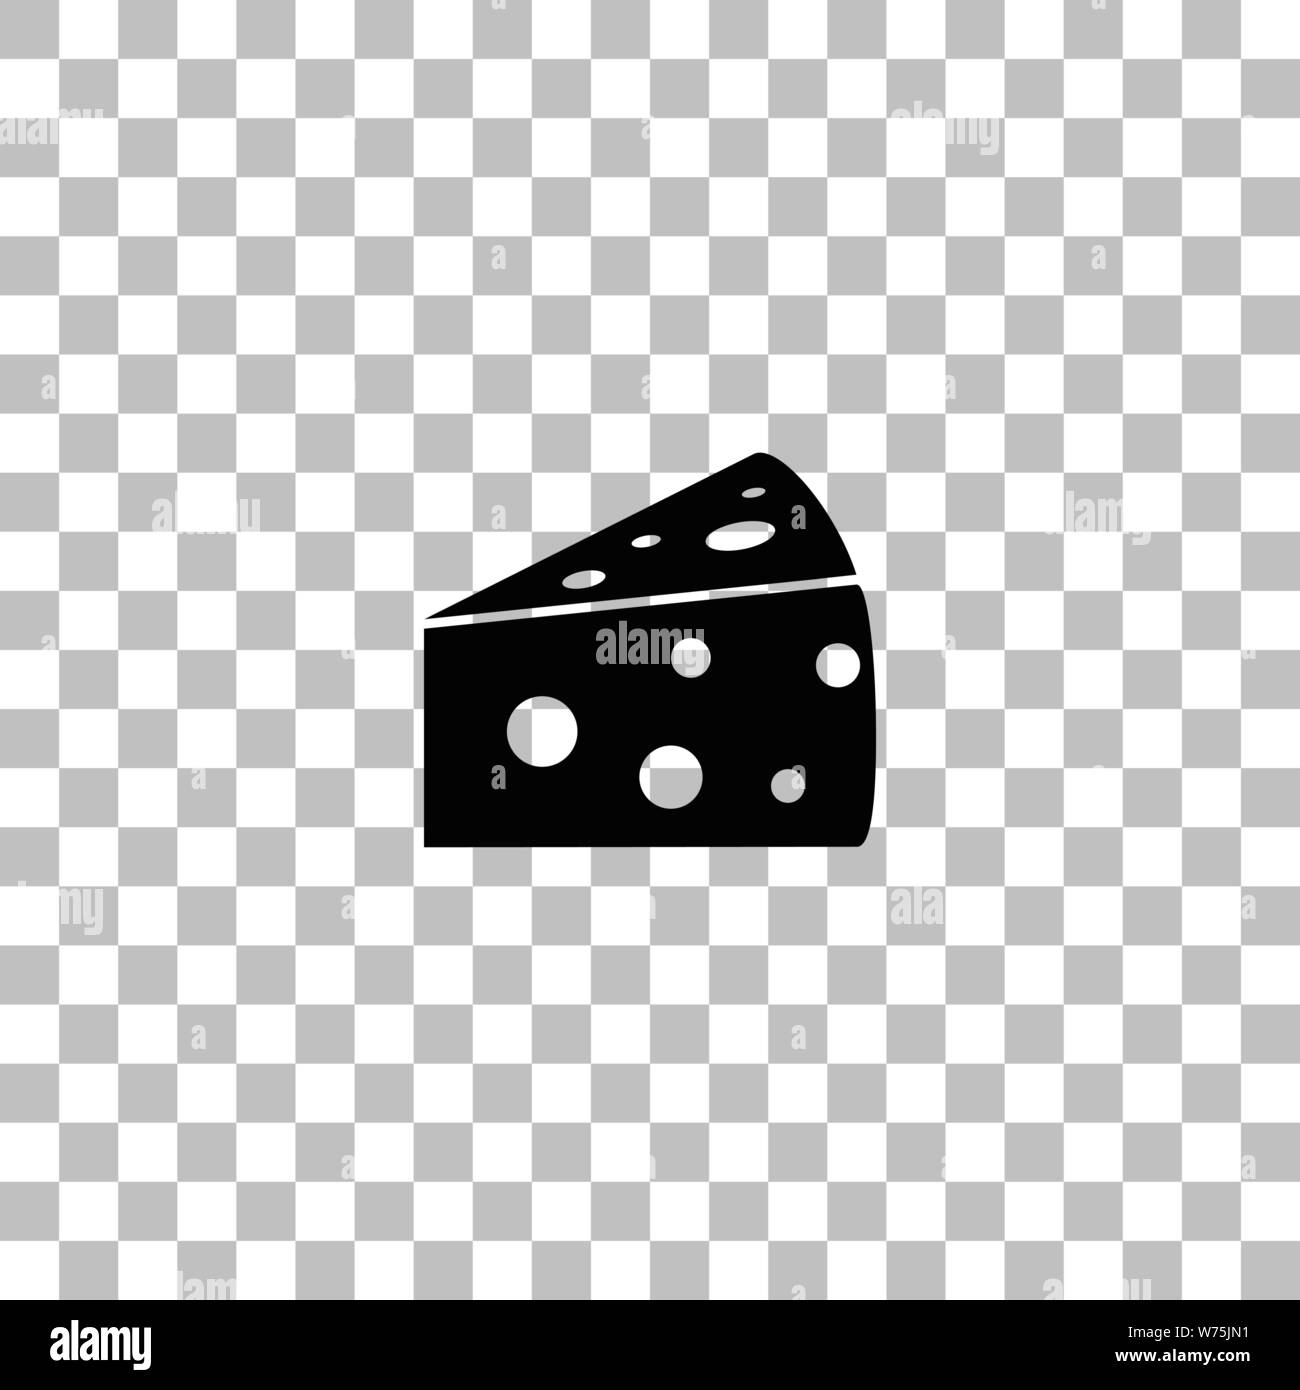 Cheese. Black flat icon on a transparent background. Pictogram for your project Stock Vector